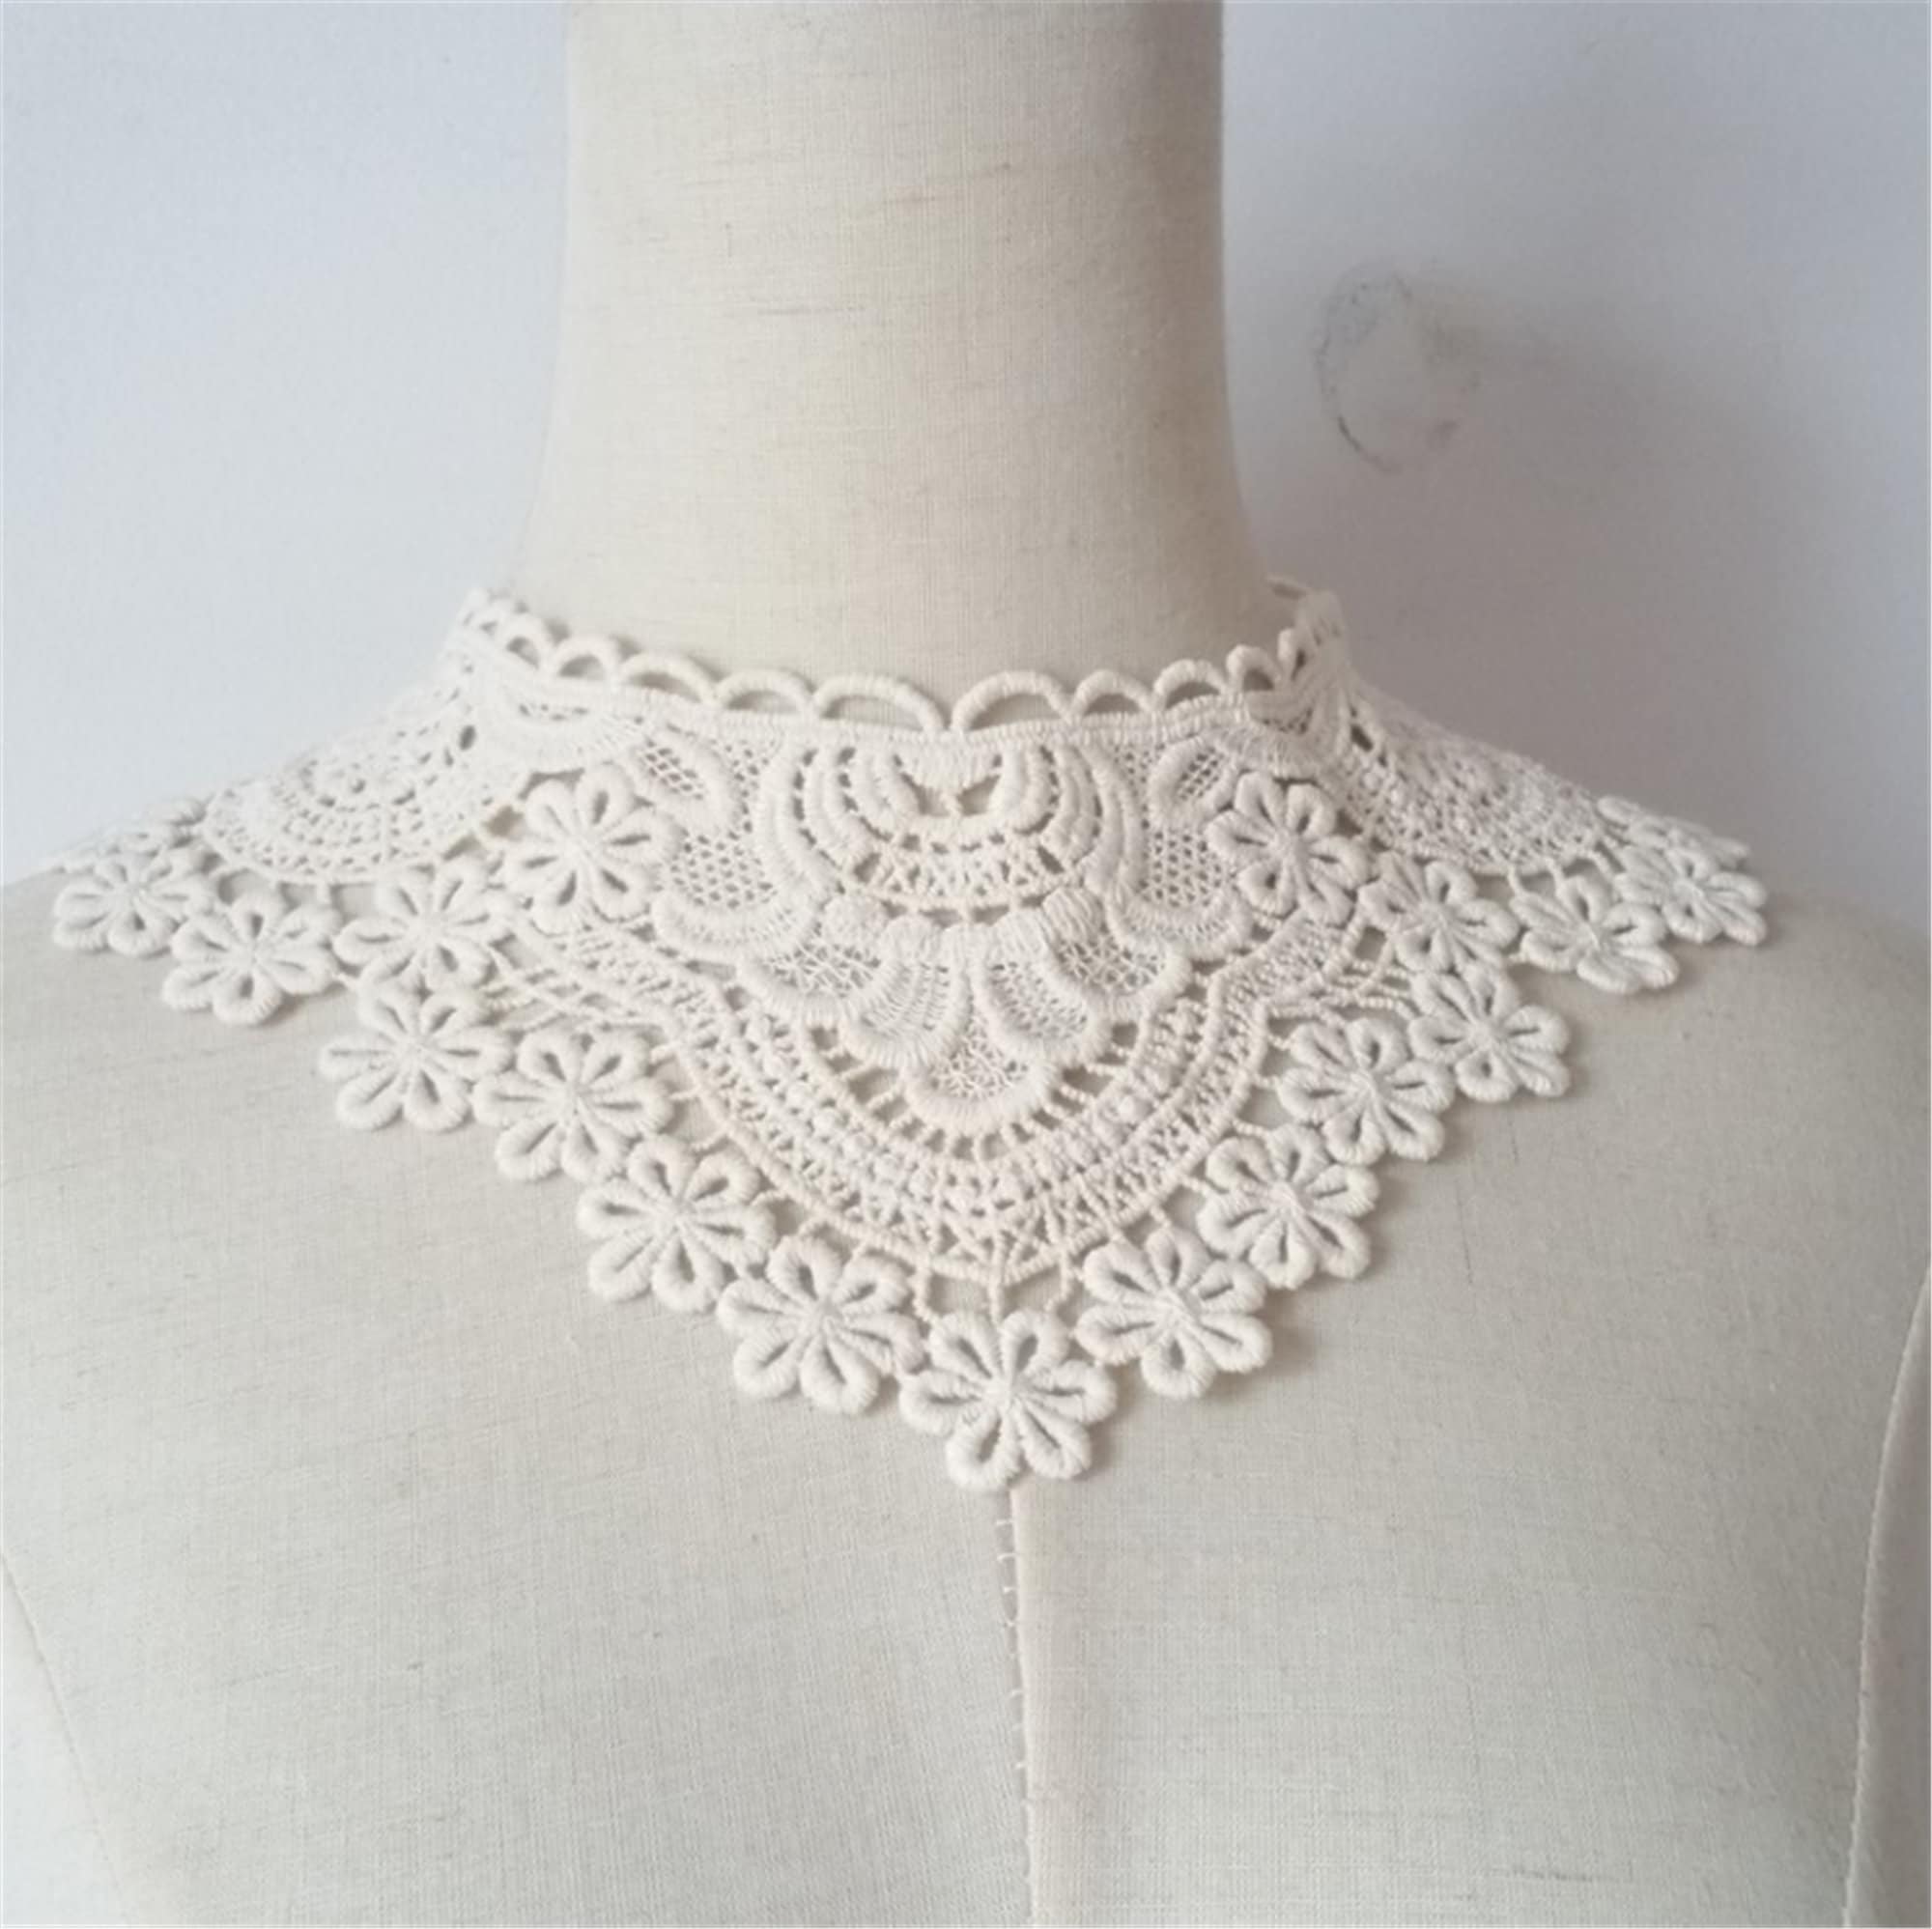 MAMUNU 2 Pieces White Lace Collar, Embroidery Lace Fabric Collar Lace  Neckline Collar Floral for Women and Girls Sewing Supplies Crafts